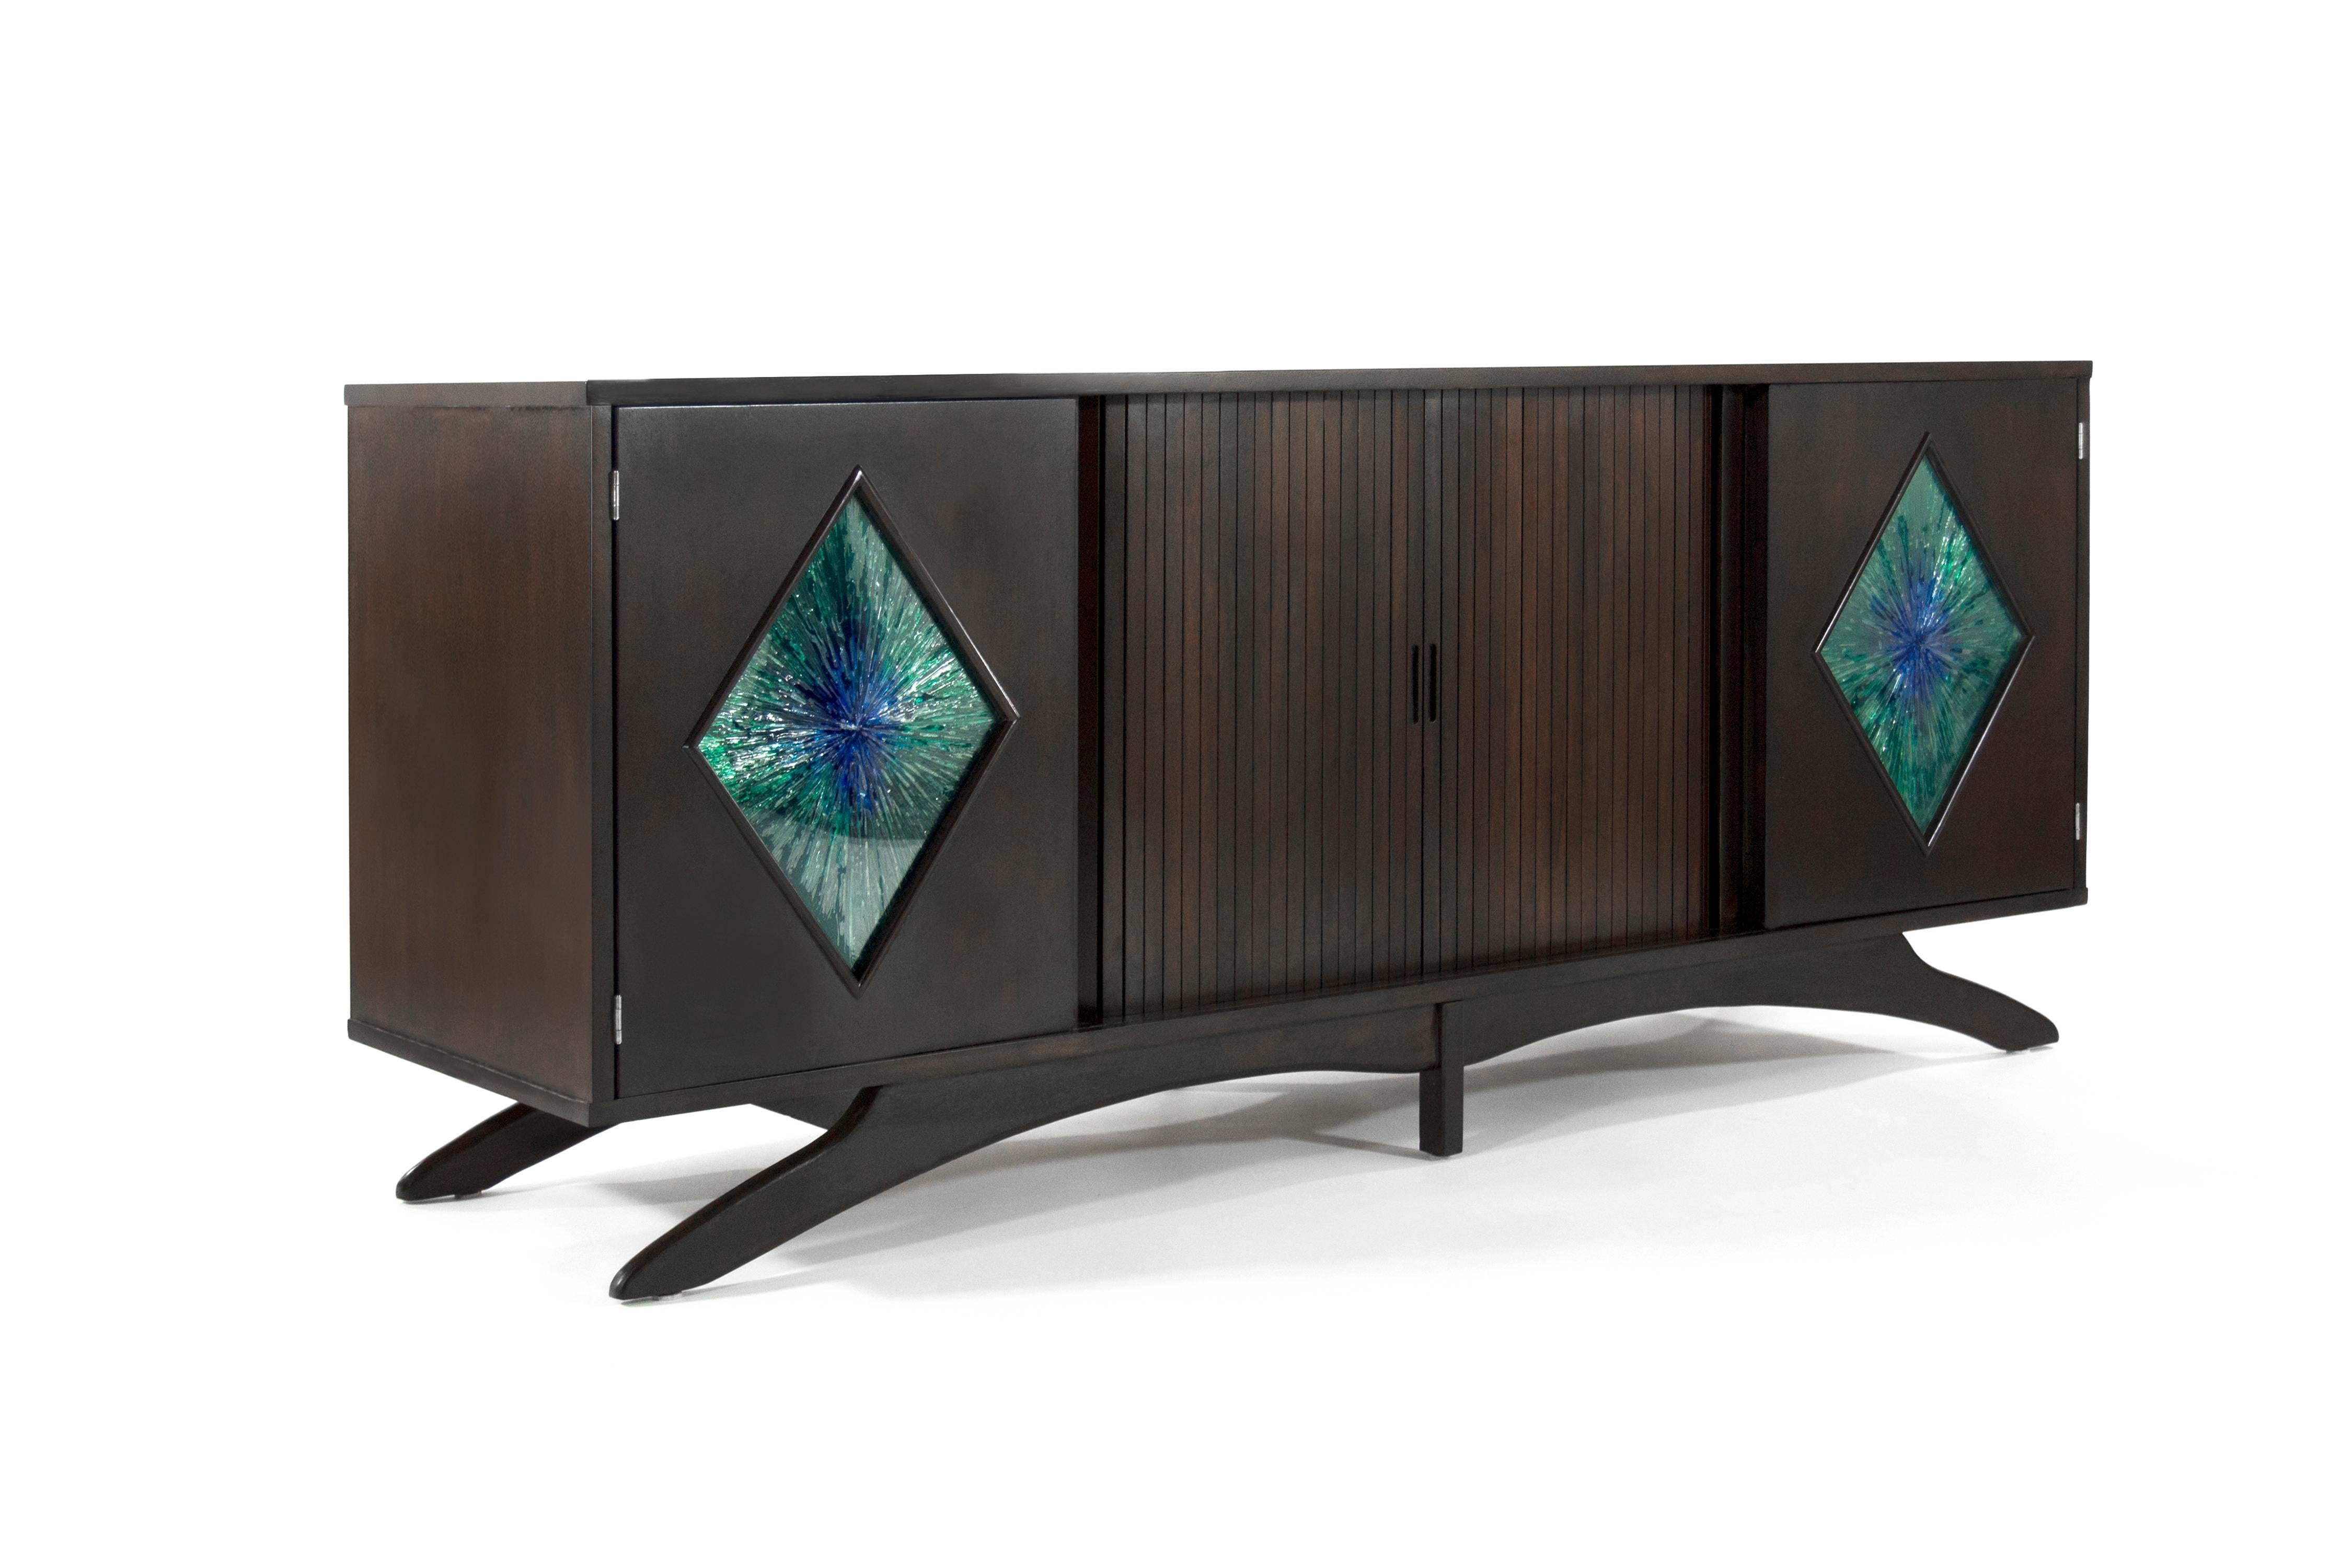 Stunning Mid-Century sculptural form credenza or sideboard with stained glass detail on doors.

Newly refinished in dark.